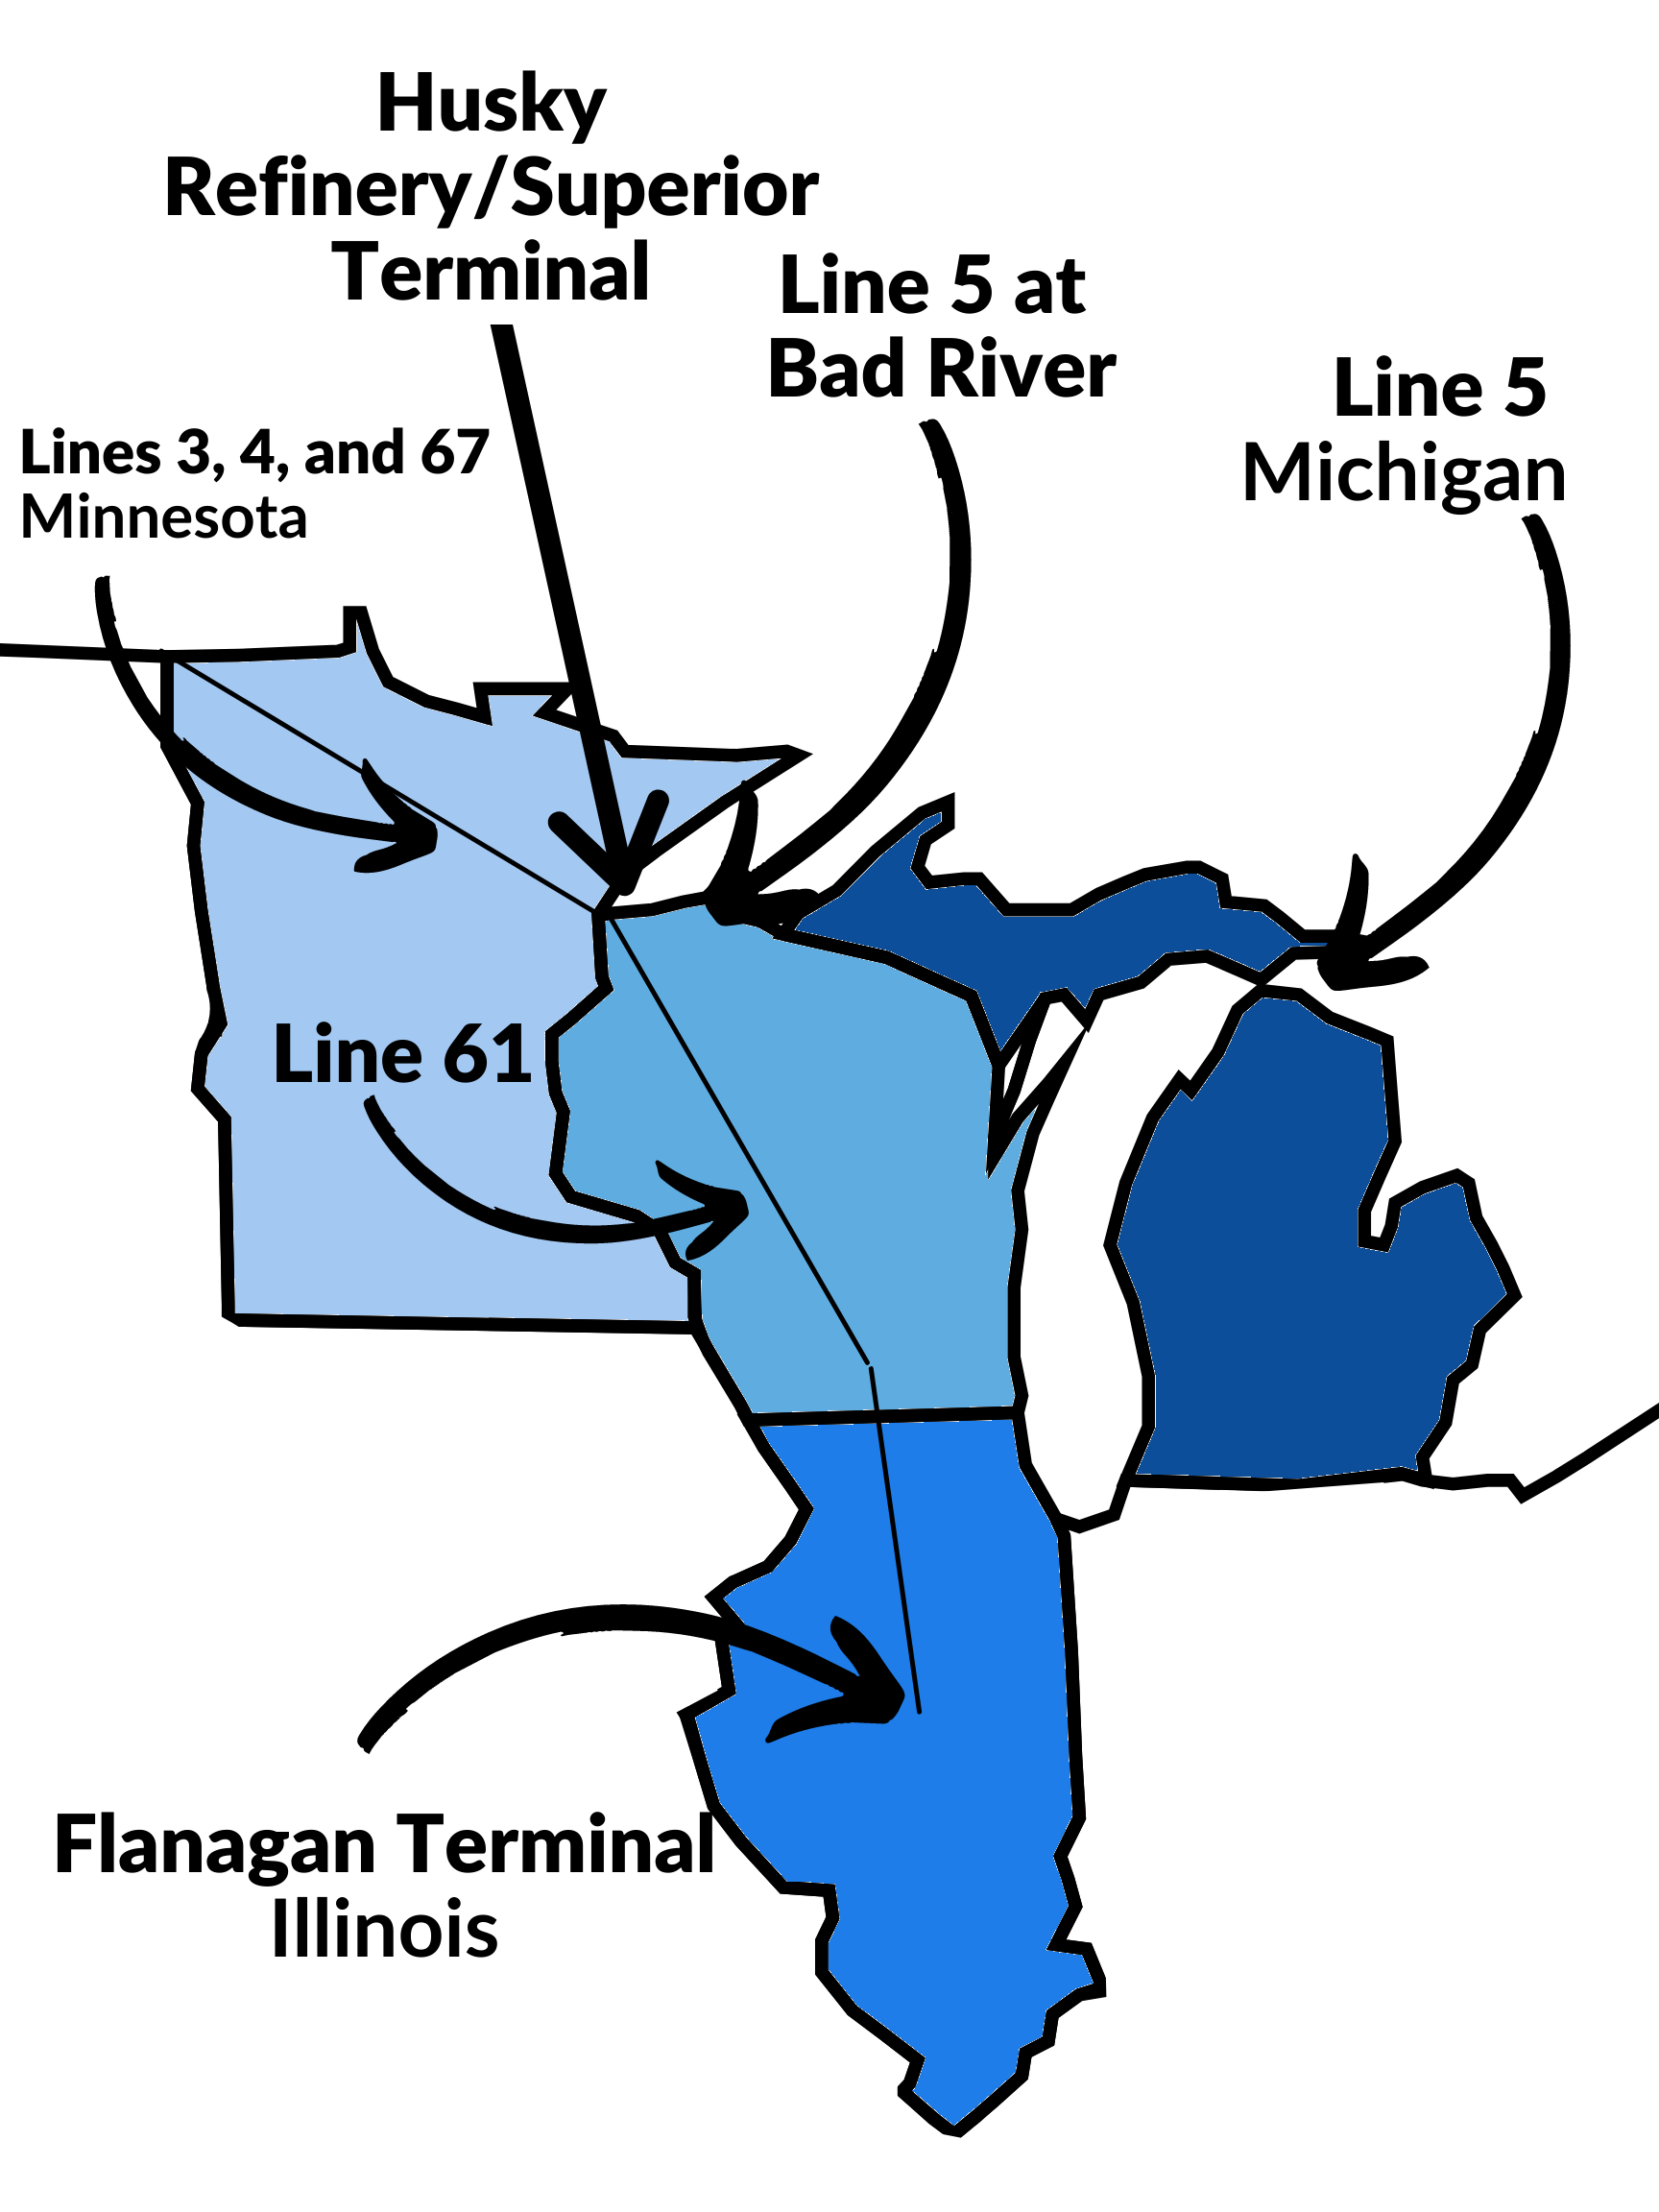 Midwest pipelines map showing Lines 4, 67, 61 and the Flanagan Terminal